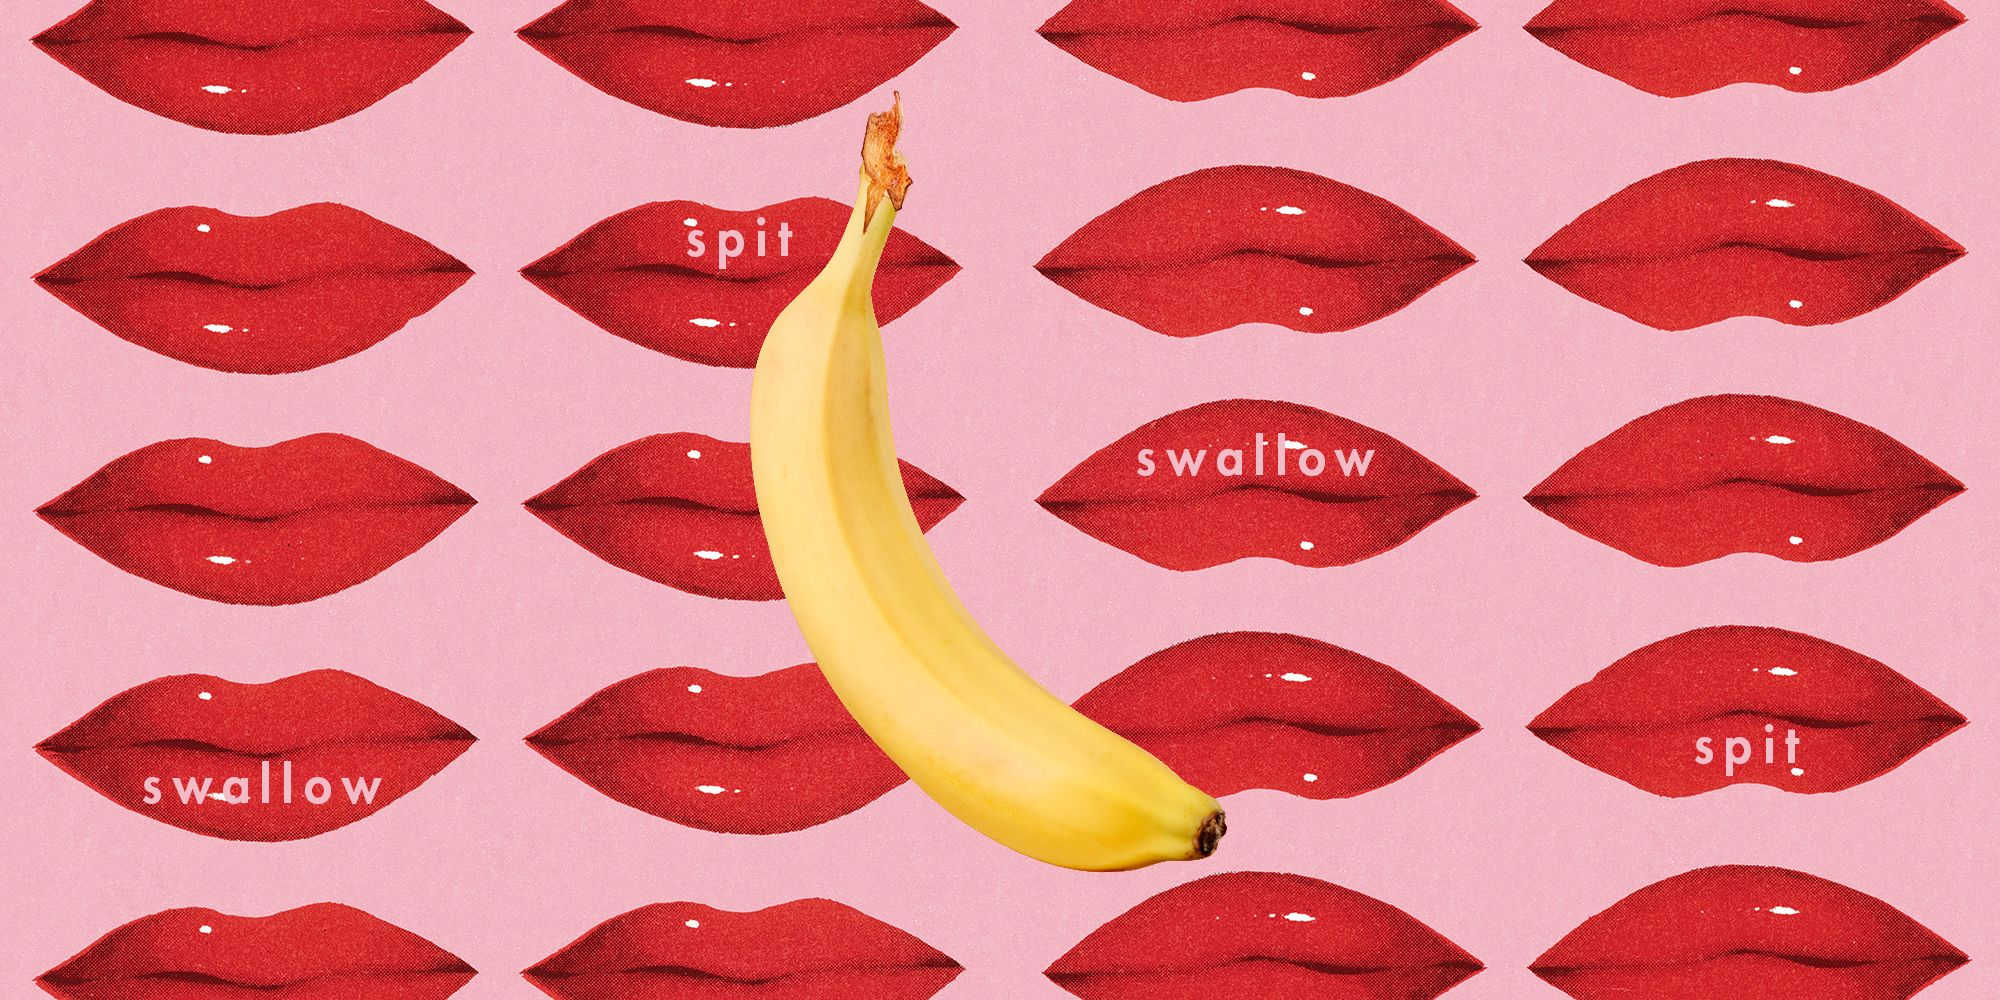 Spit or Swallow